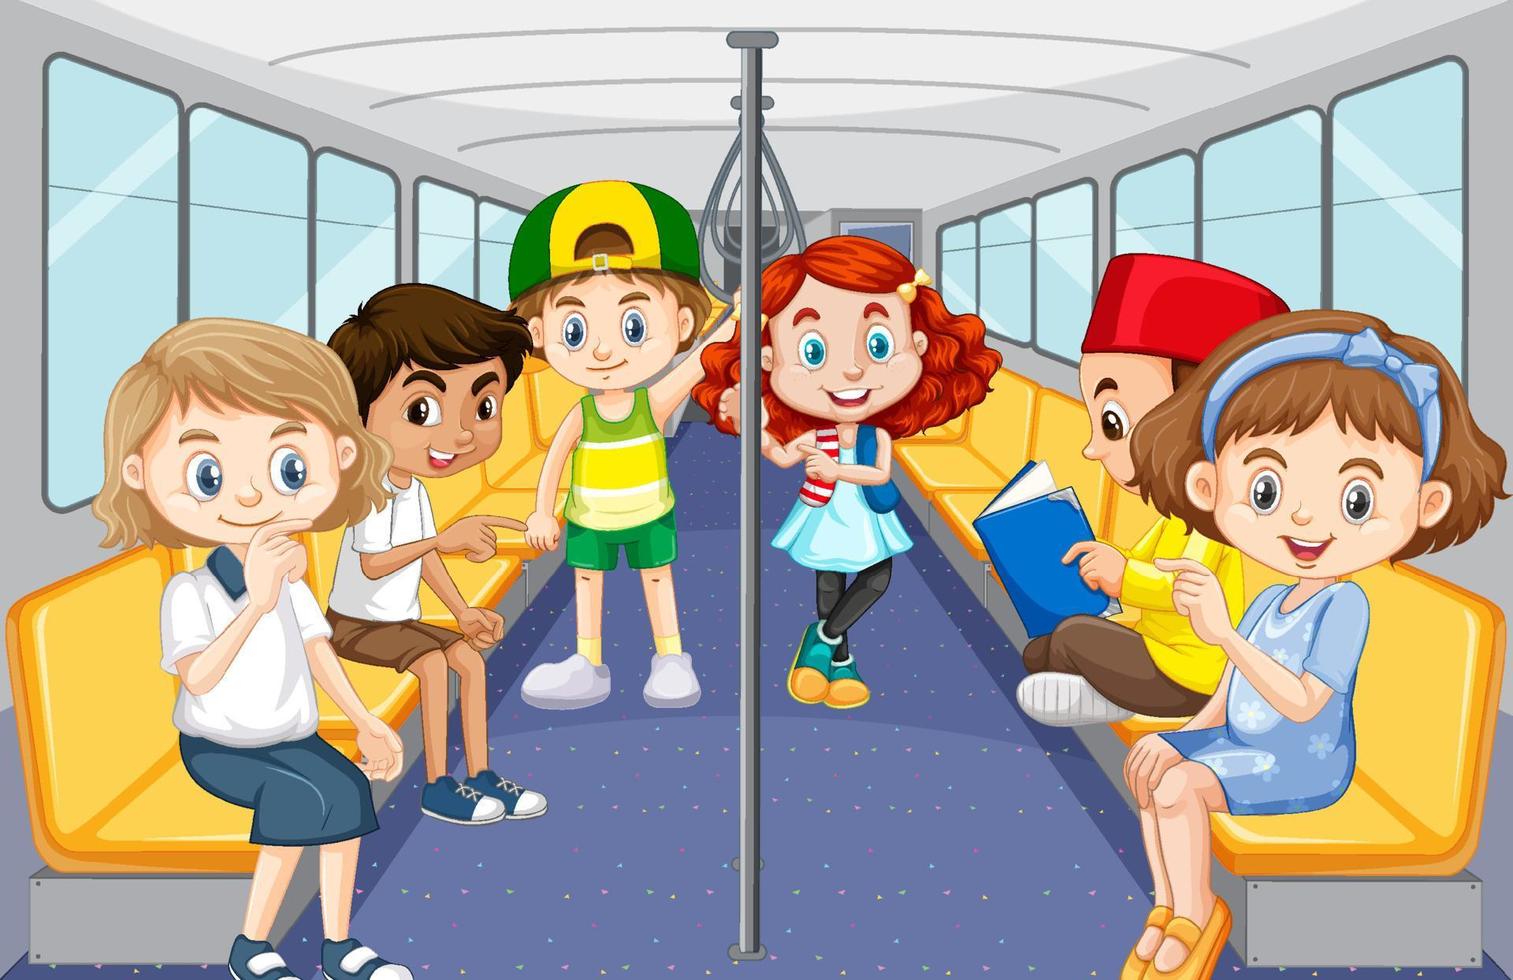 Scene with many people using public transportation vector